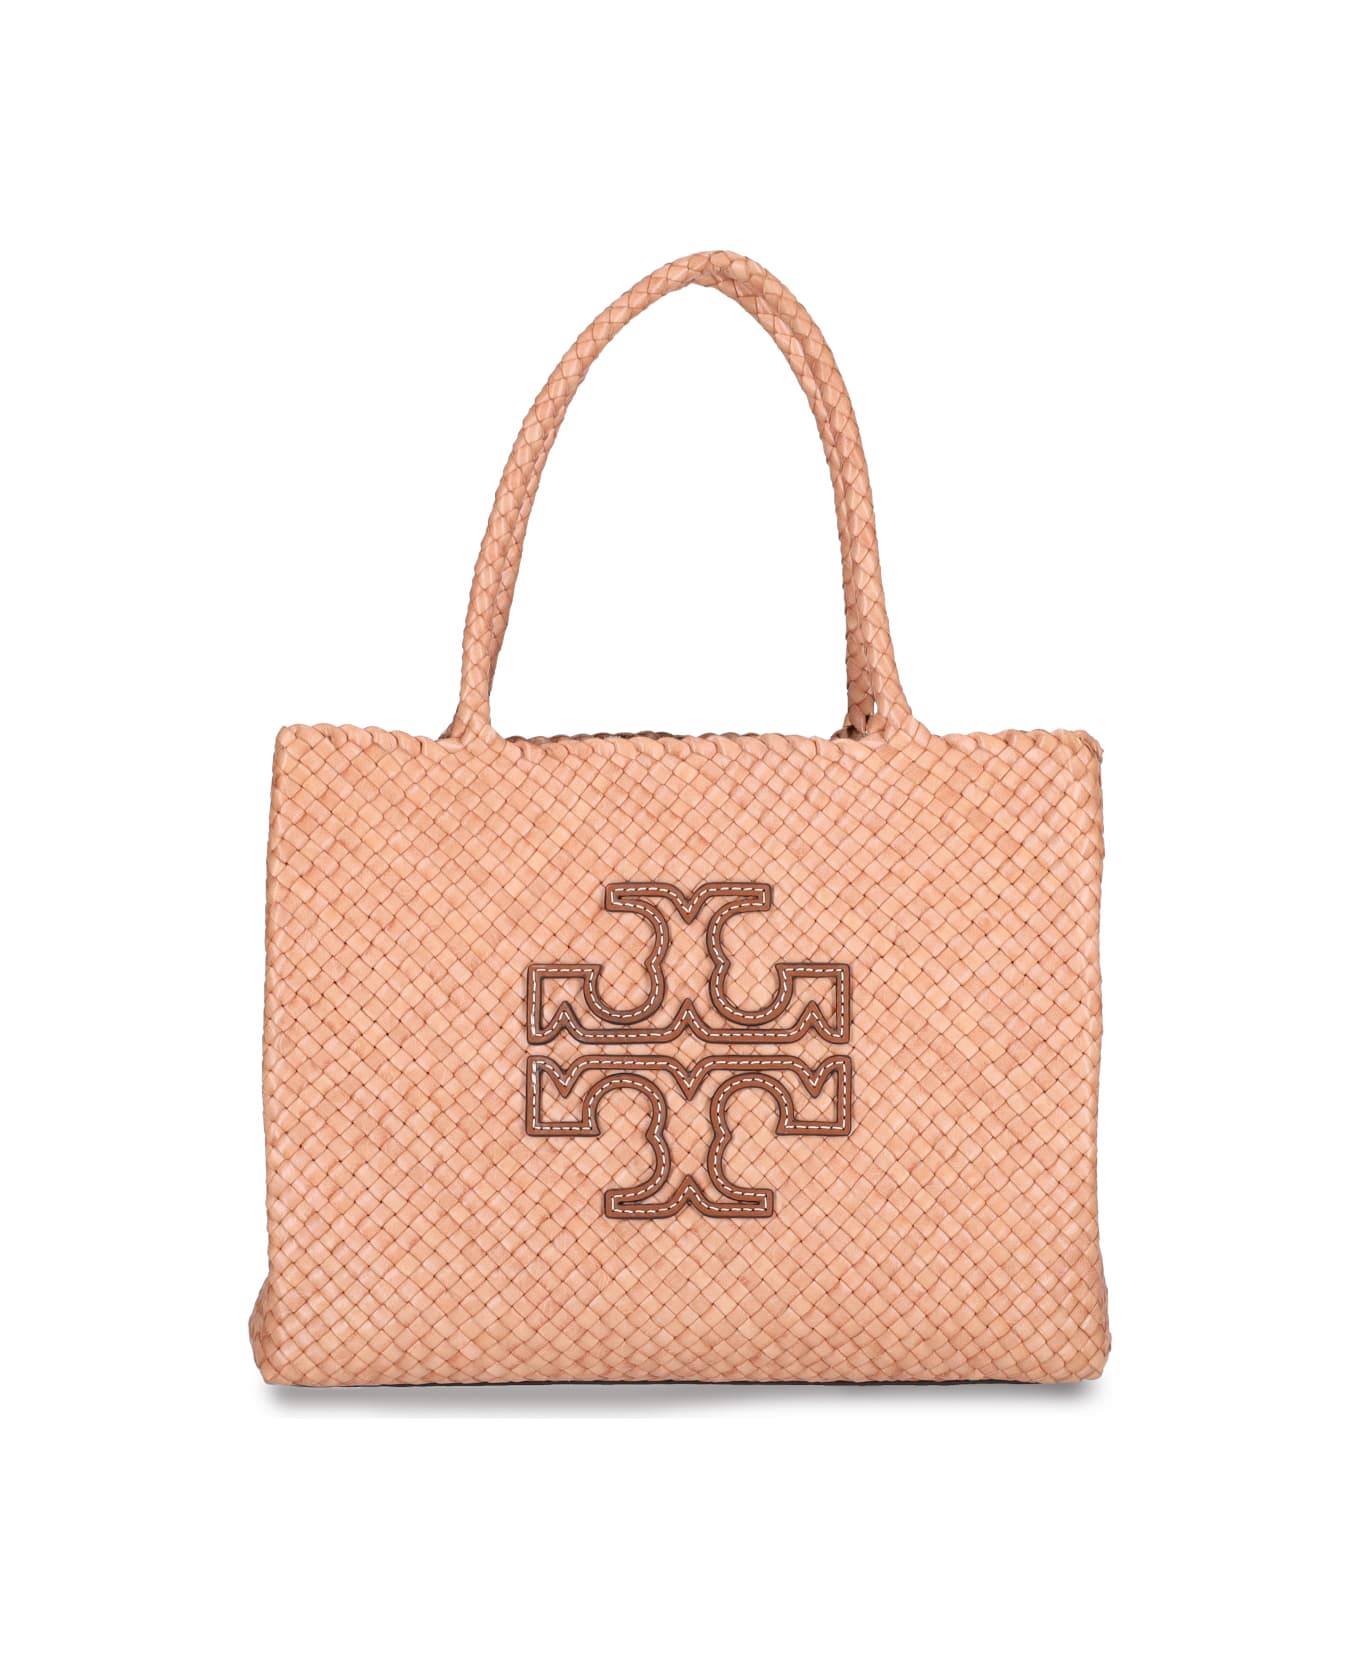 Tory Burch 'mcgraw Dragon Woven' Tote Bag - Pink トートバッグ